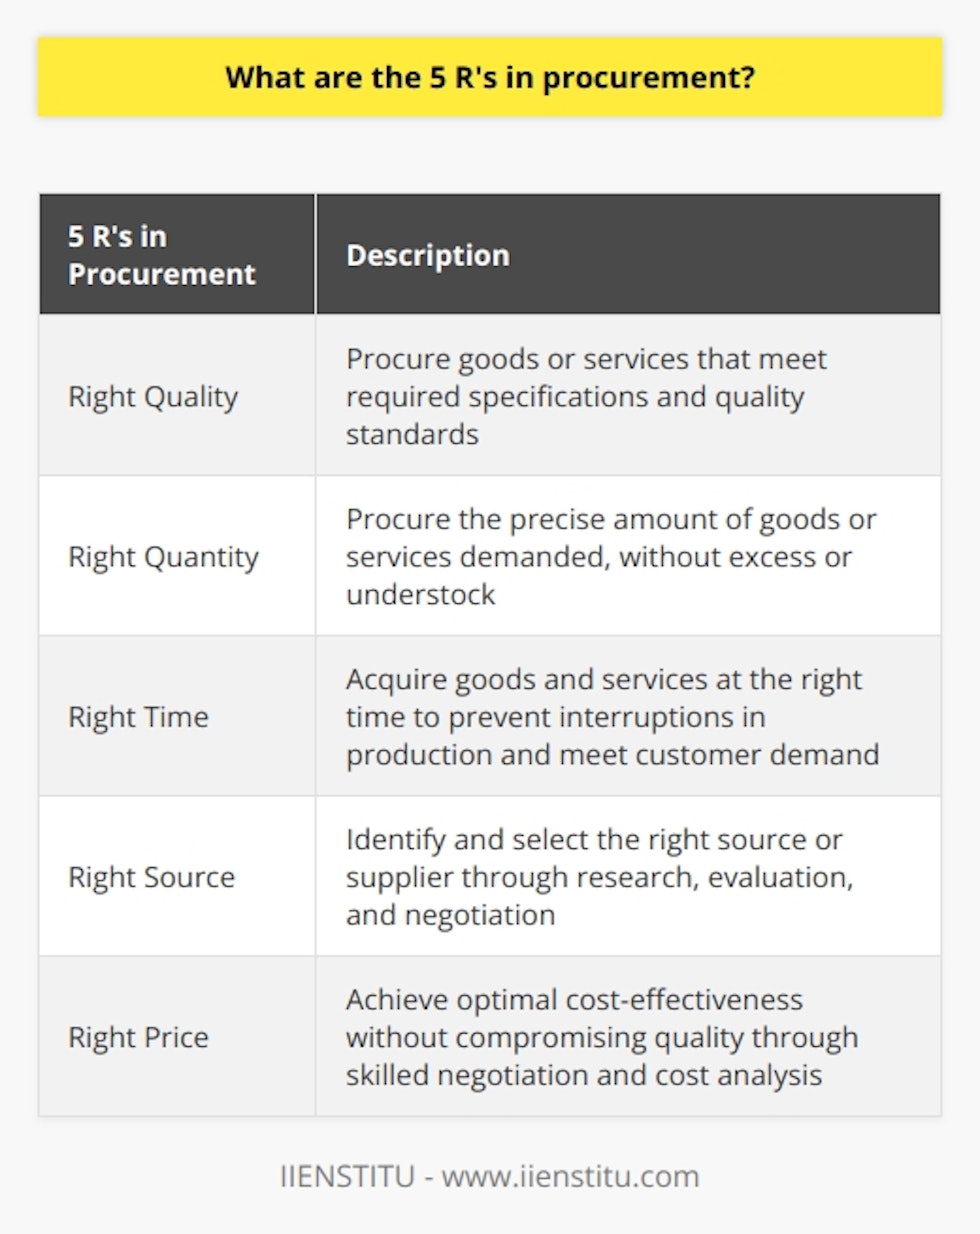 The 5 R's in procurement are crucial for ensuring the success and efficiency of the procurement process. They include the right quality, right quantity, right time, right source, and right price. Firstly, the right quality refers to procuring goods or services that meet the required specifications and quality standards. Procurement professionals must demonstrate meticulousness in upholding these criteria throughout the procurement process.Secondly, the right quantity means procuring the precise amount of goods or services demanded, without excess or understock. This requires accurate forecasting and inventory management to prevent increased holding costs or production delays.Thirdly, acquiring goods and services at the right time is essential to prevent interruptions in production, meet customer demand, and respond to shifts in the marketplace. This involves effective planning, lead-time assessment, and punctual delivery.Identifying and selecting the right source or supplier is the fourth 'R' in procurement. This requires thorough research, evaluation, and negotiation to ensure the ideal combination of cost, quality, and timely delivery. Building strong relationships with suppliers strengthens the supply chain.Lastly, achieving the right price involves obtaining optimal cost-effectiveness without compromising quality. Skilled negotiation, market research, and cost analysis techniques are essential to determine the most reasonable prices. Consideration of the total-cost-of-ownership is also important, which includes factors like lifecycle costs and transportation.Overall, following the 5 R's in procurement enhances the efficiency and effectiveness of the process, leading to a more competitive and successful organization. Adhering to these principles ensures the right quality, quantity, time, source, and price in procured goods and services.